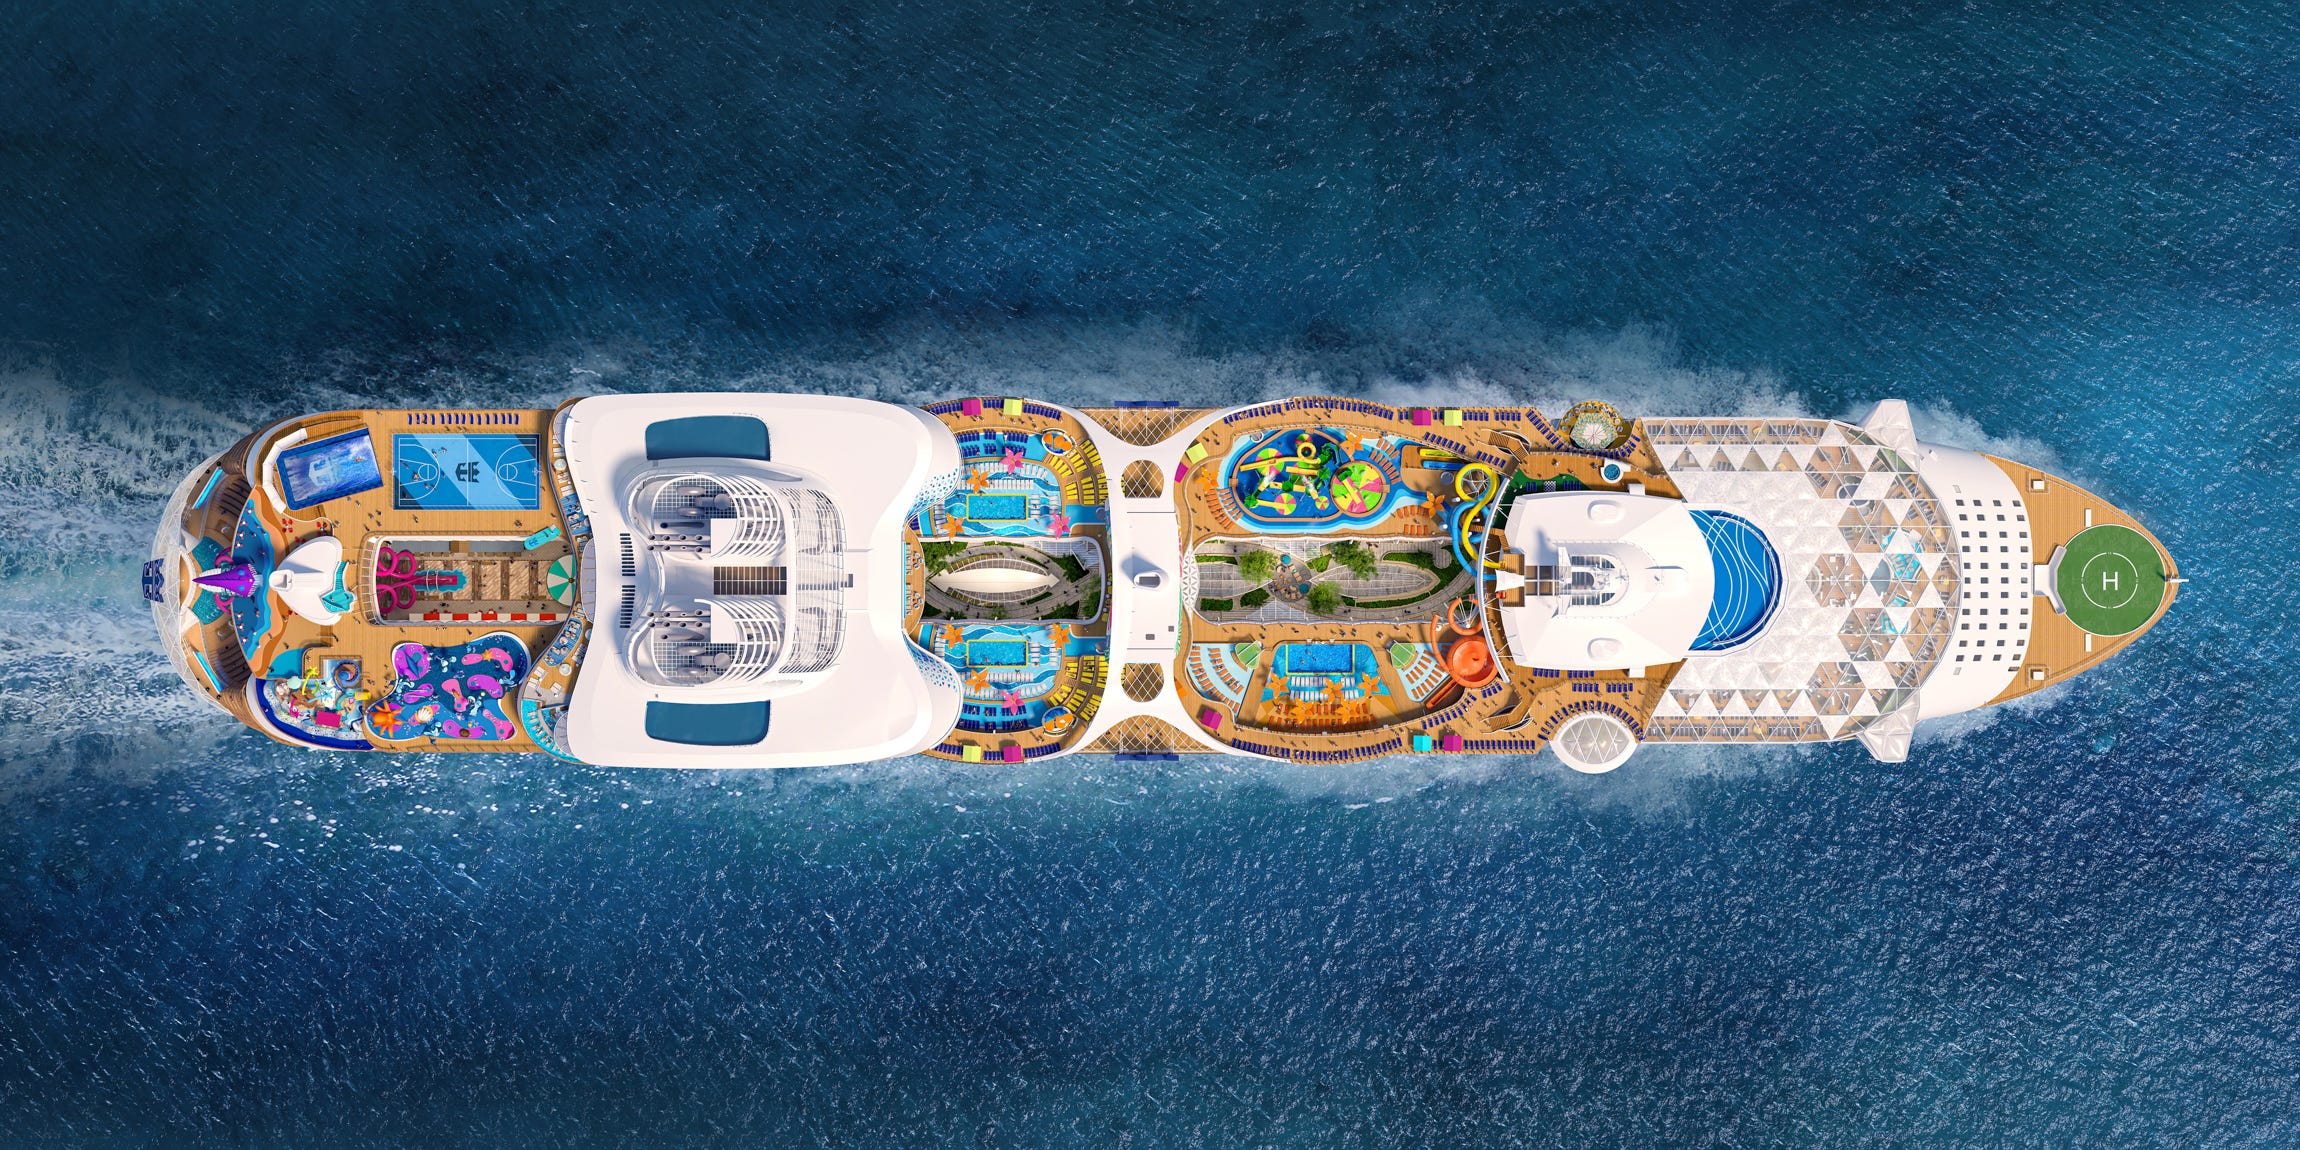 <p>Instead, the upcoming floating resort would join Royal Caribbean's previous Oasis class — the same group as the runner-up in the world's largest cruise ship competition, <a href="https://www.businessinsider.com/royal-caribbean-wonder-of-the-seas-worlds-largest-cruise-tour-2022-12">Wonder of the Seas</a>.</p>